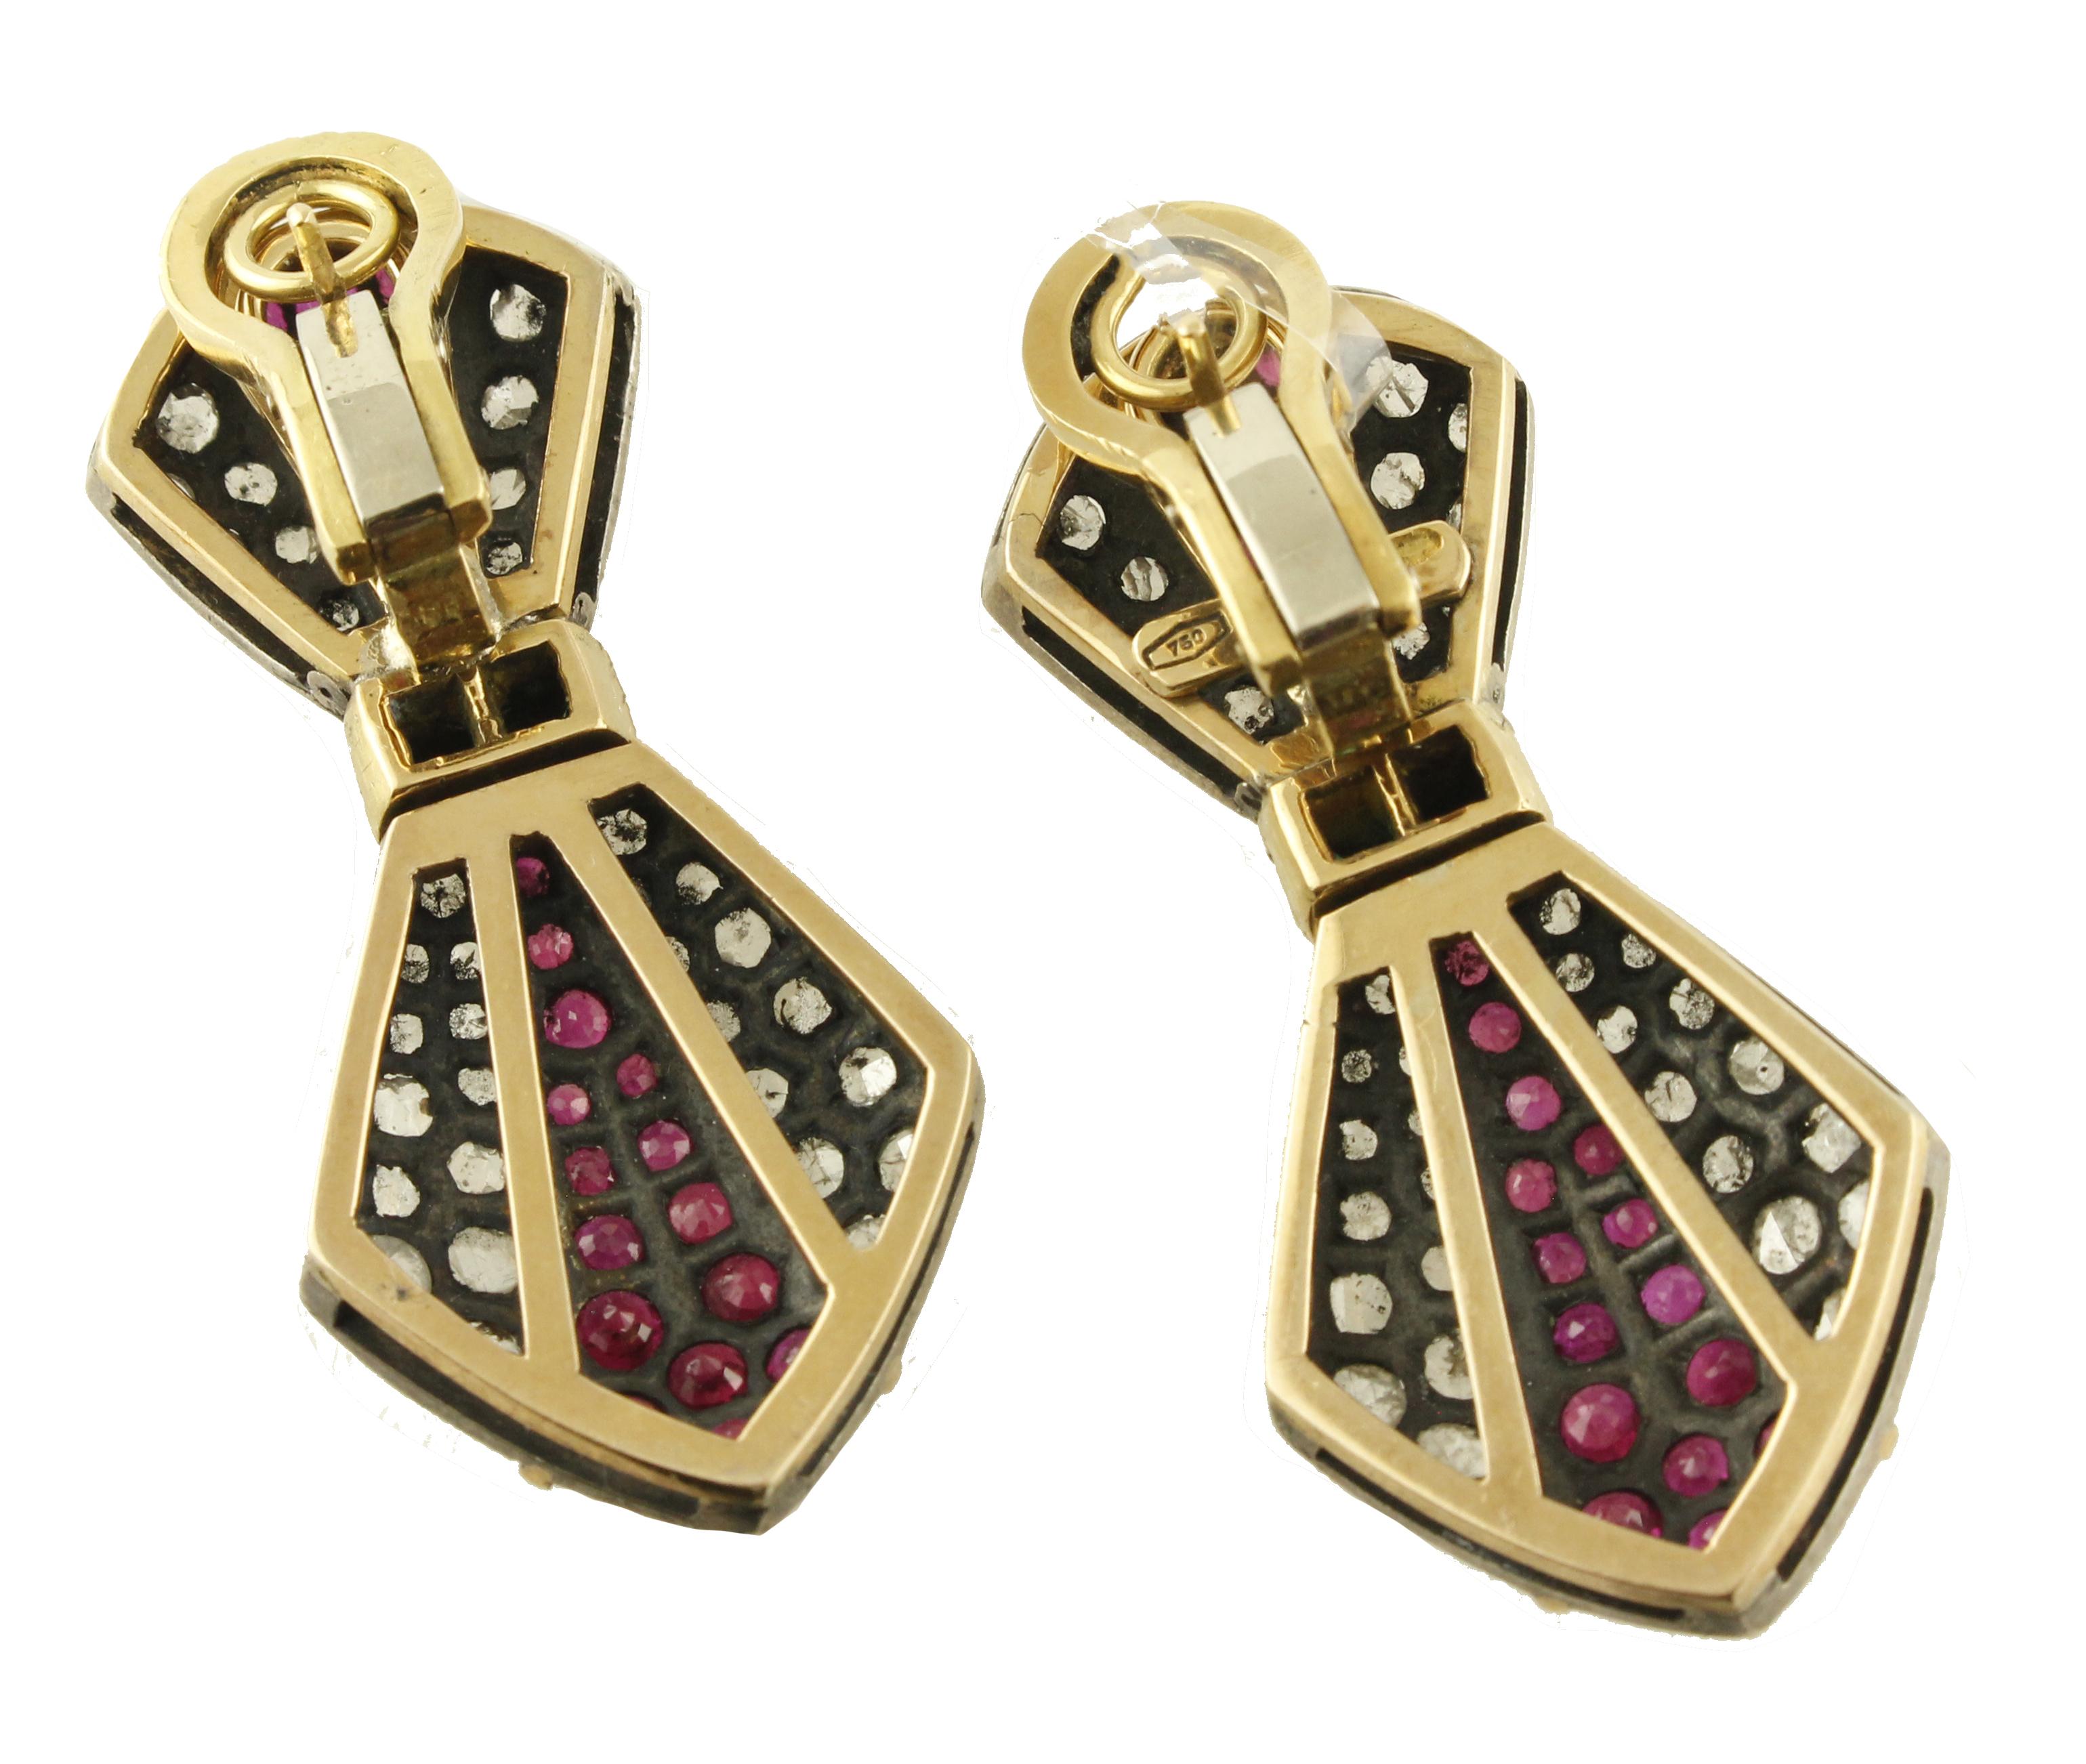 Fascinating clip earrings in 18 kt yellow gold and silver, 4 cm long, all studded with 2.38 ct diamonds, rubies and 7 ct emeralds. Total weight g 21.31
Diamonds ct 2.38
Rubies / Emeralds ct 7
Total weight g 21.31 / length 4 cm
RF + fcof